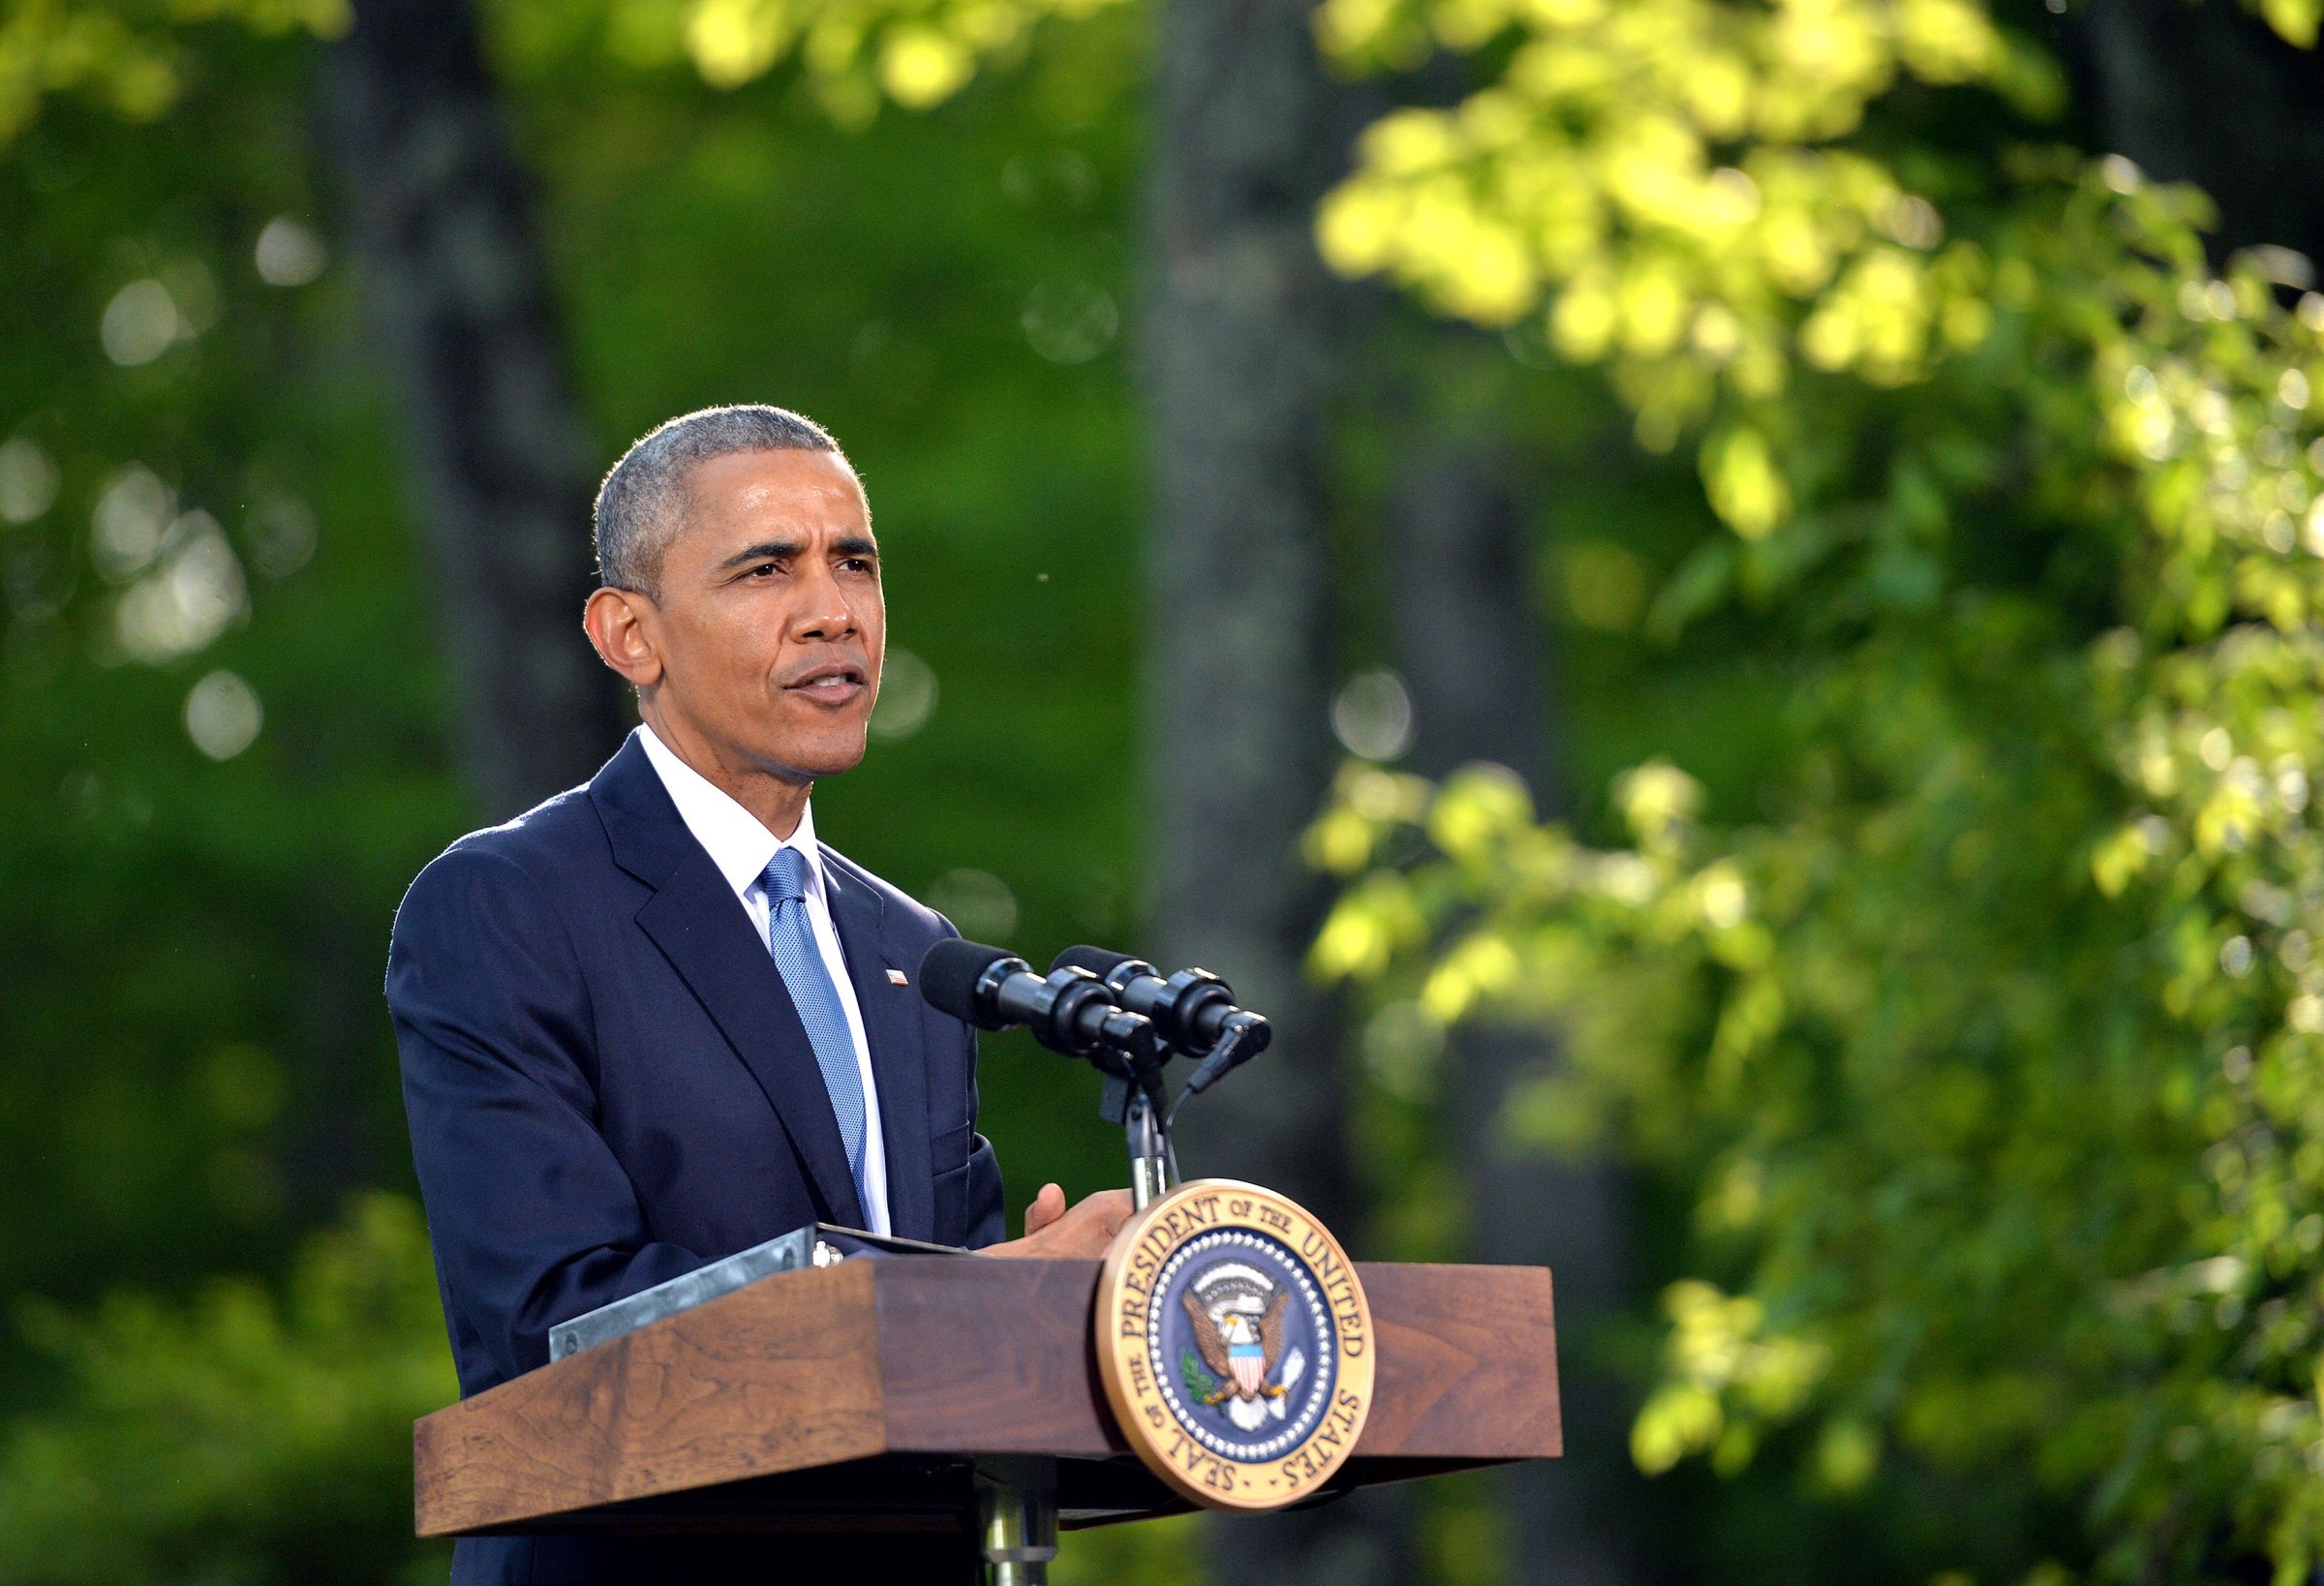 President Barack Obama speaks to reporters following the Gulf Cooperation Council-U.S. summit at Camp David on May 14, 2015.